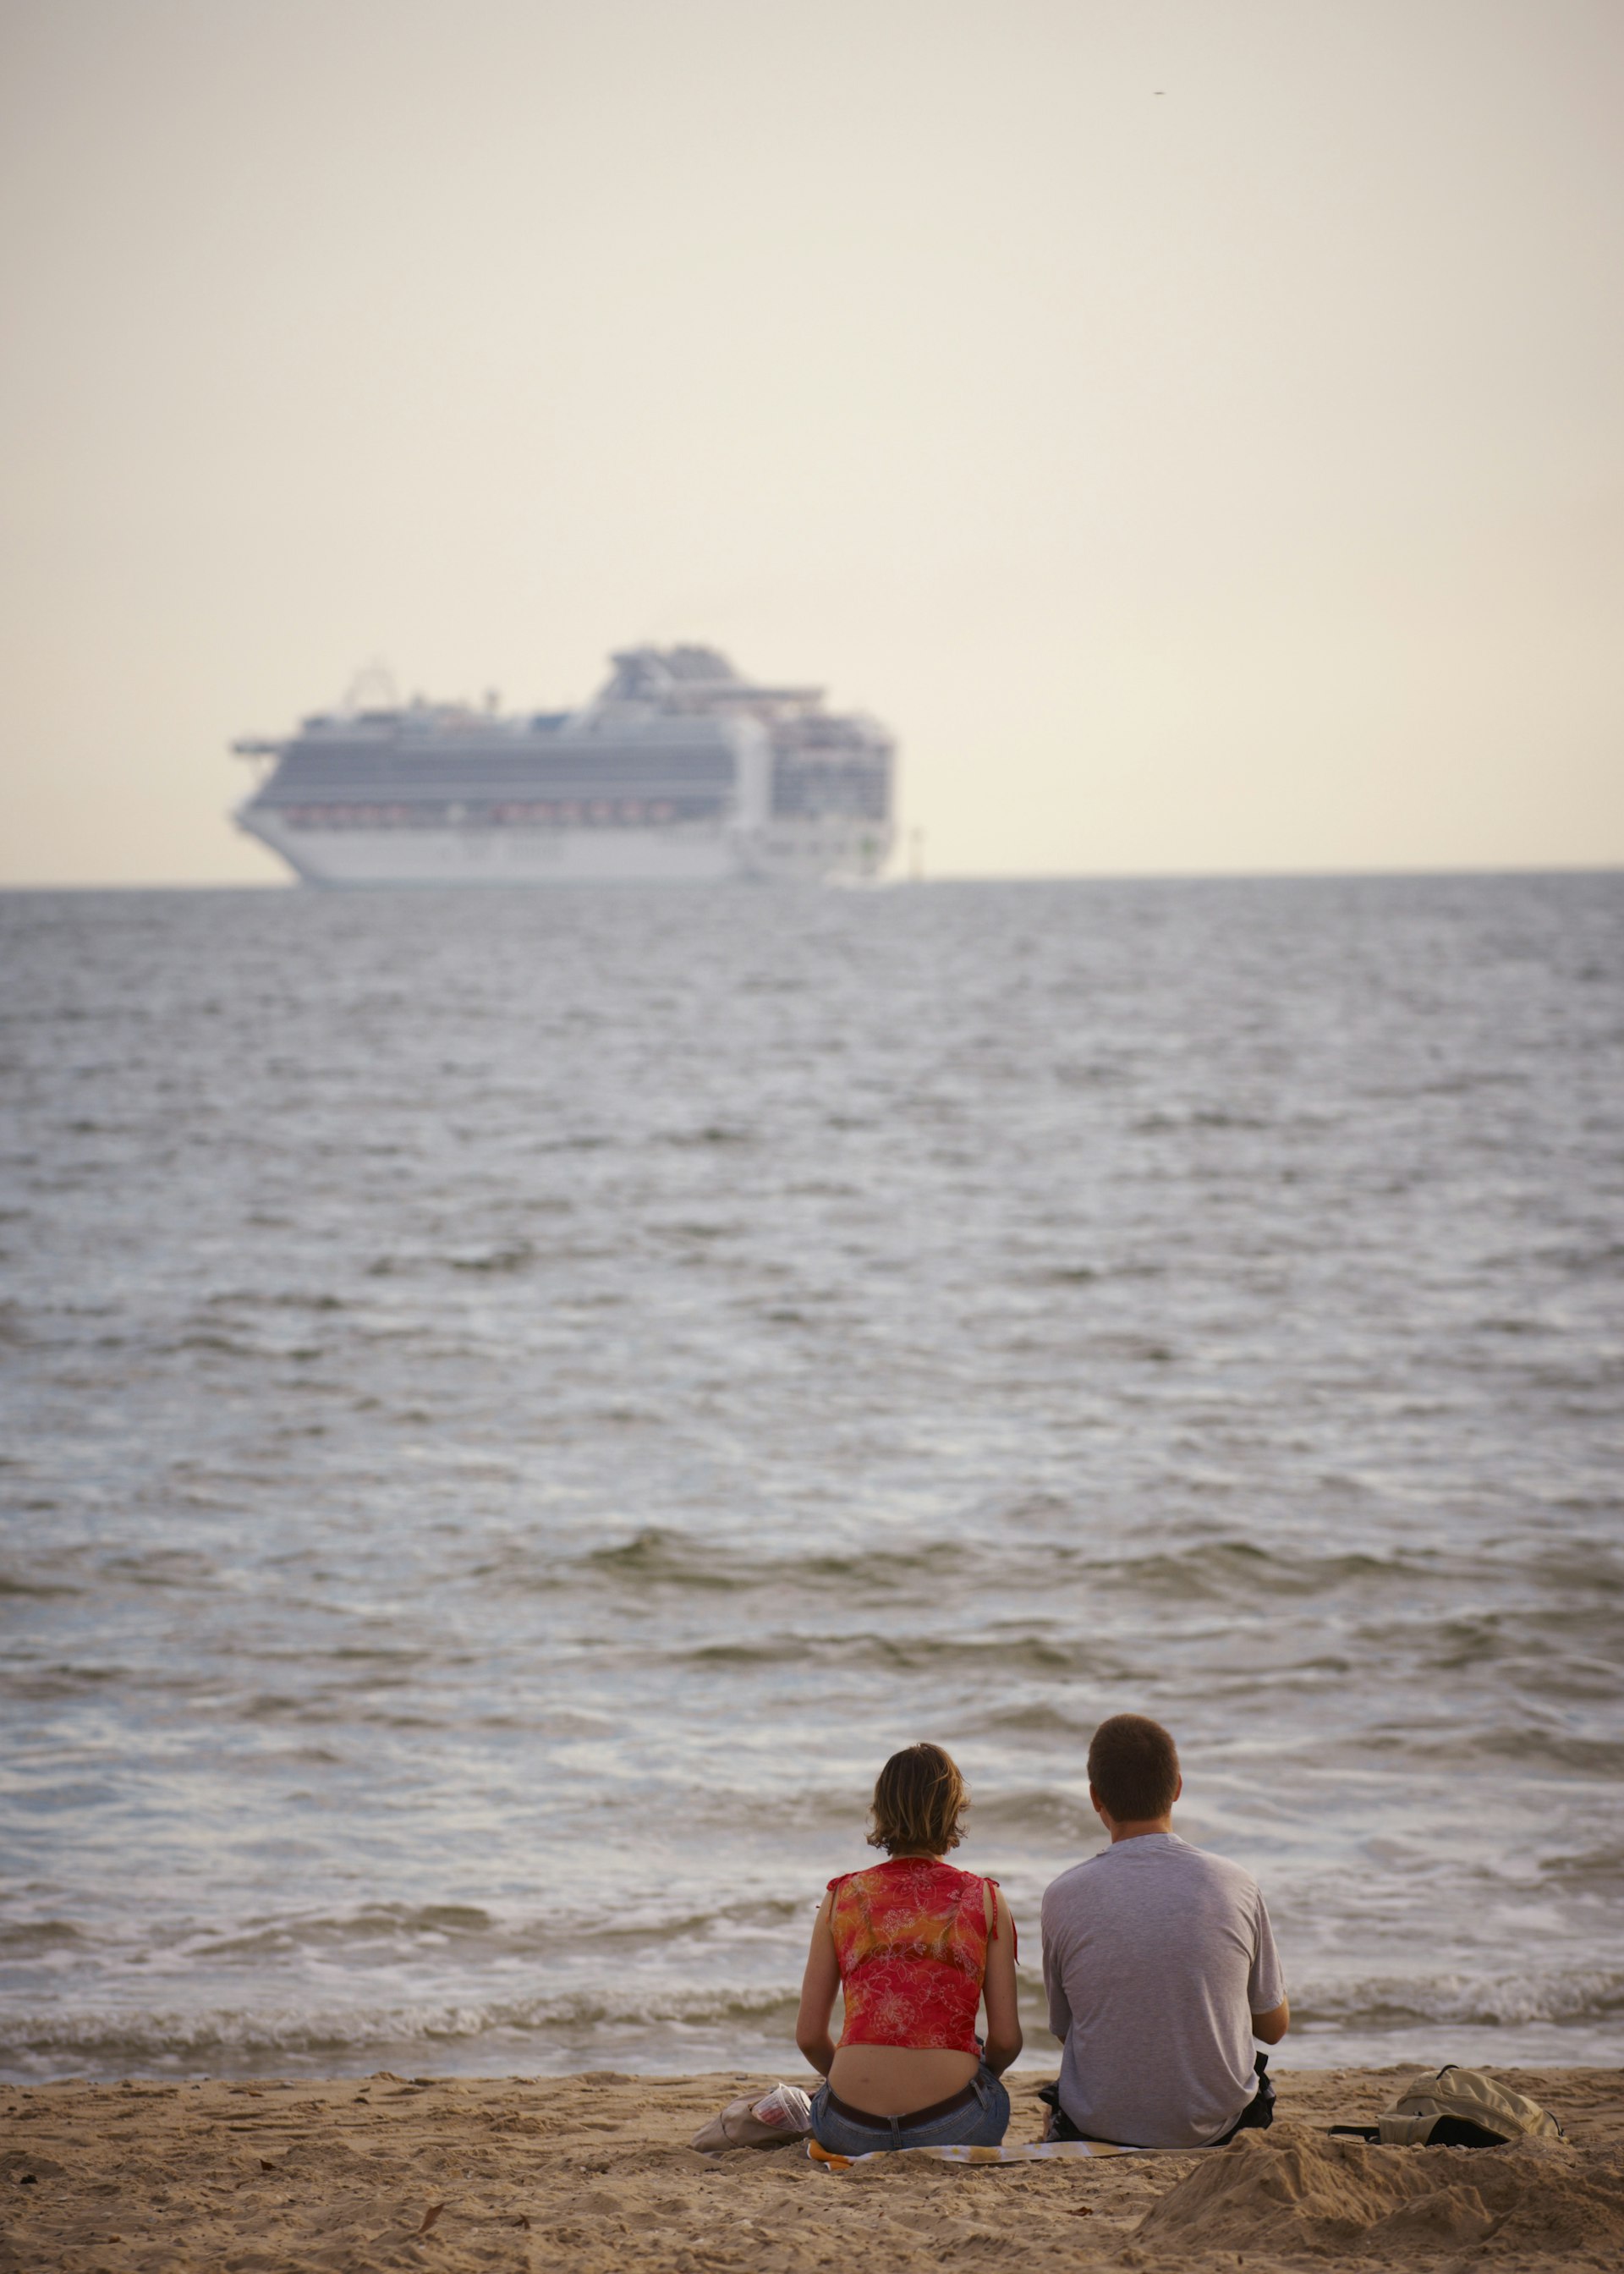 Couple sitting on sand of Port Melbourne beach watching departing cruise ship on Port Philip Bay.